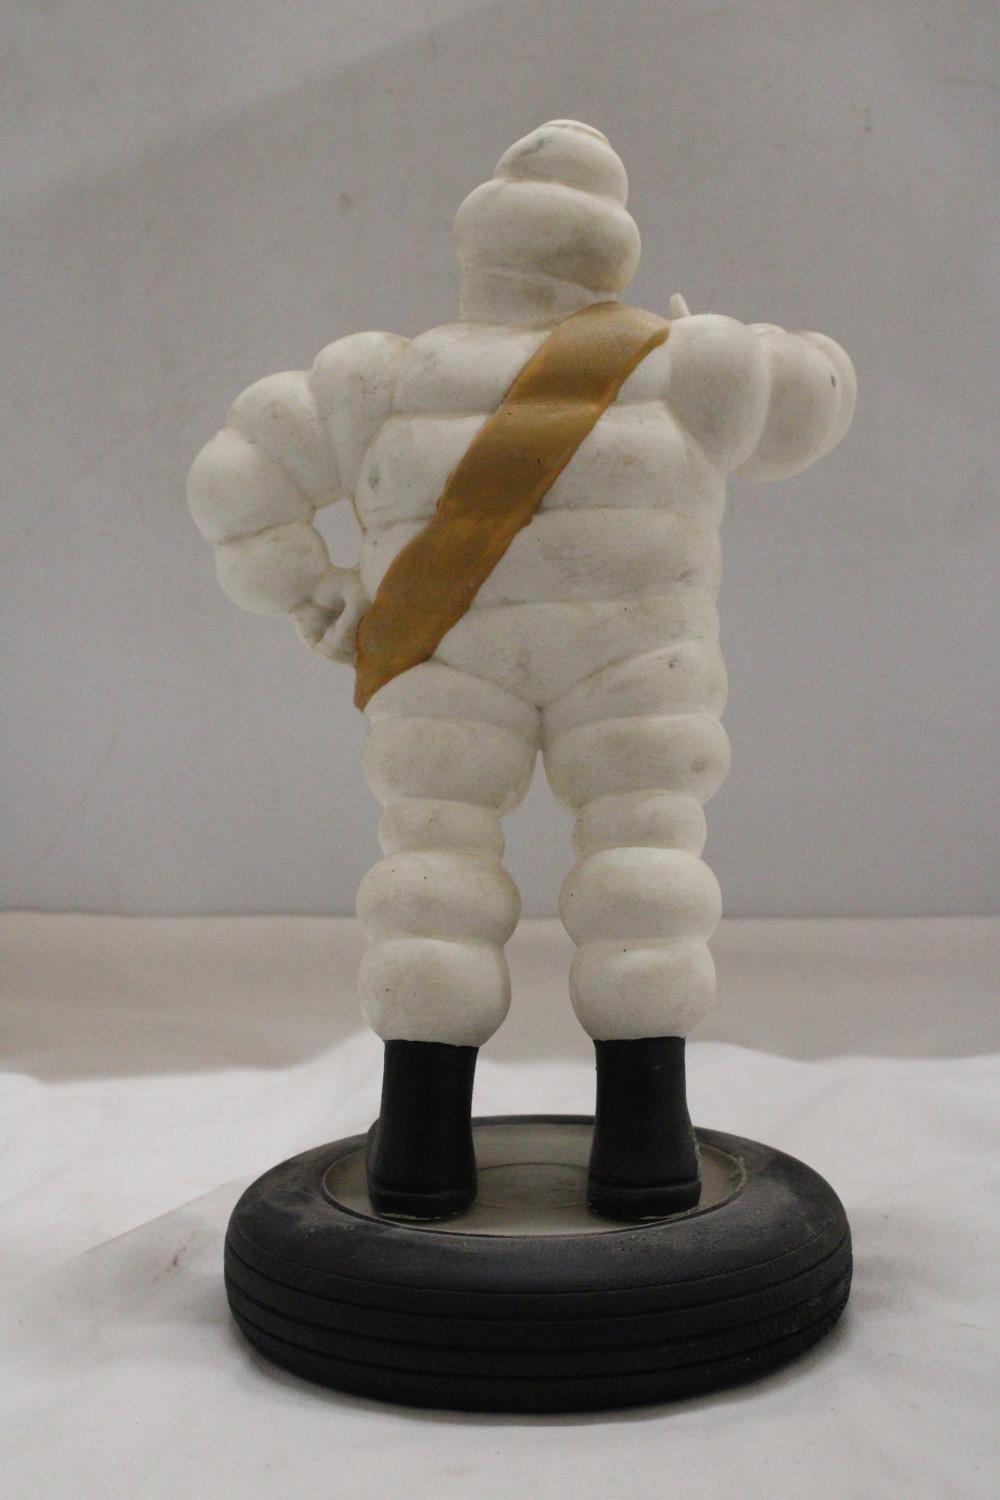 A VINTAGE ORIGINAL MICHELIN MAN ON TYRE APPROXIMATELY 33 CM HIGH - Image 4 of 5